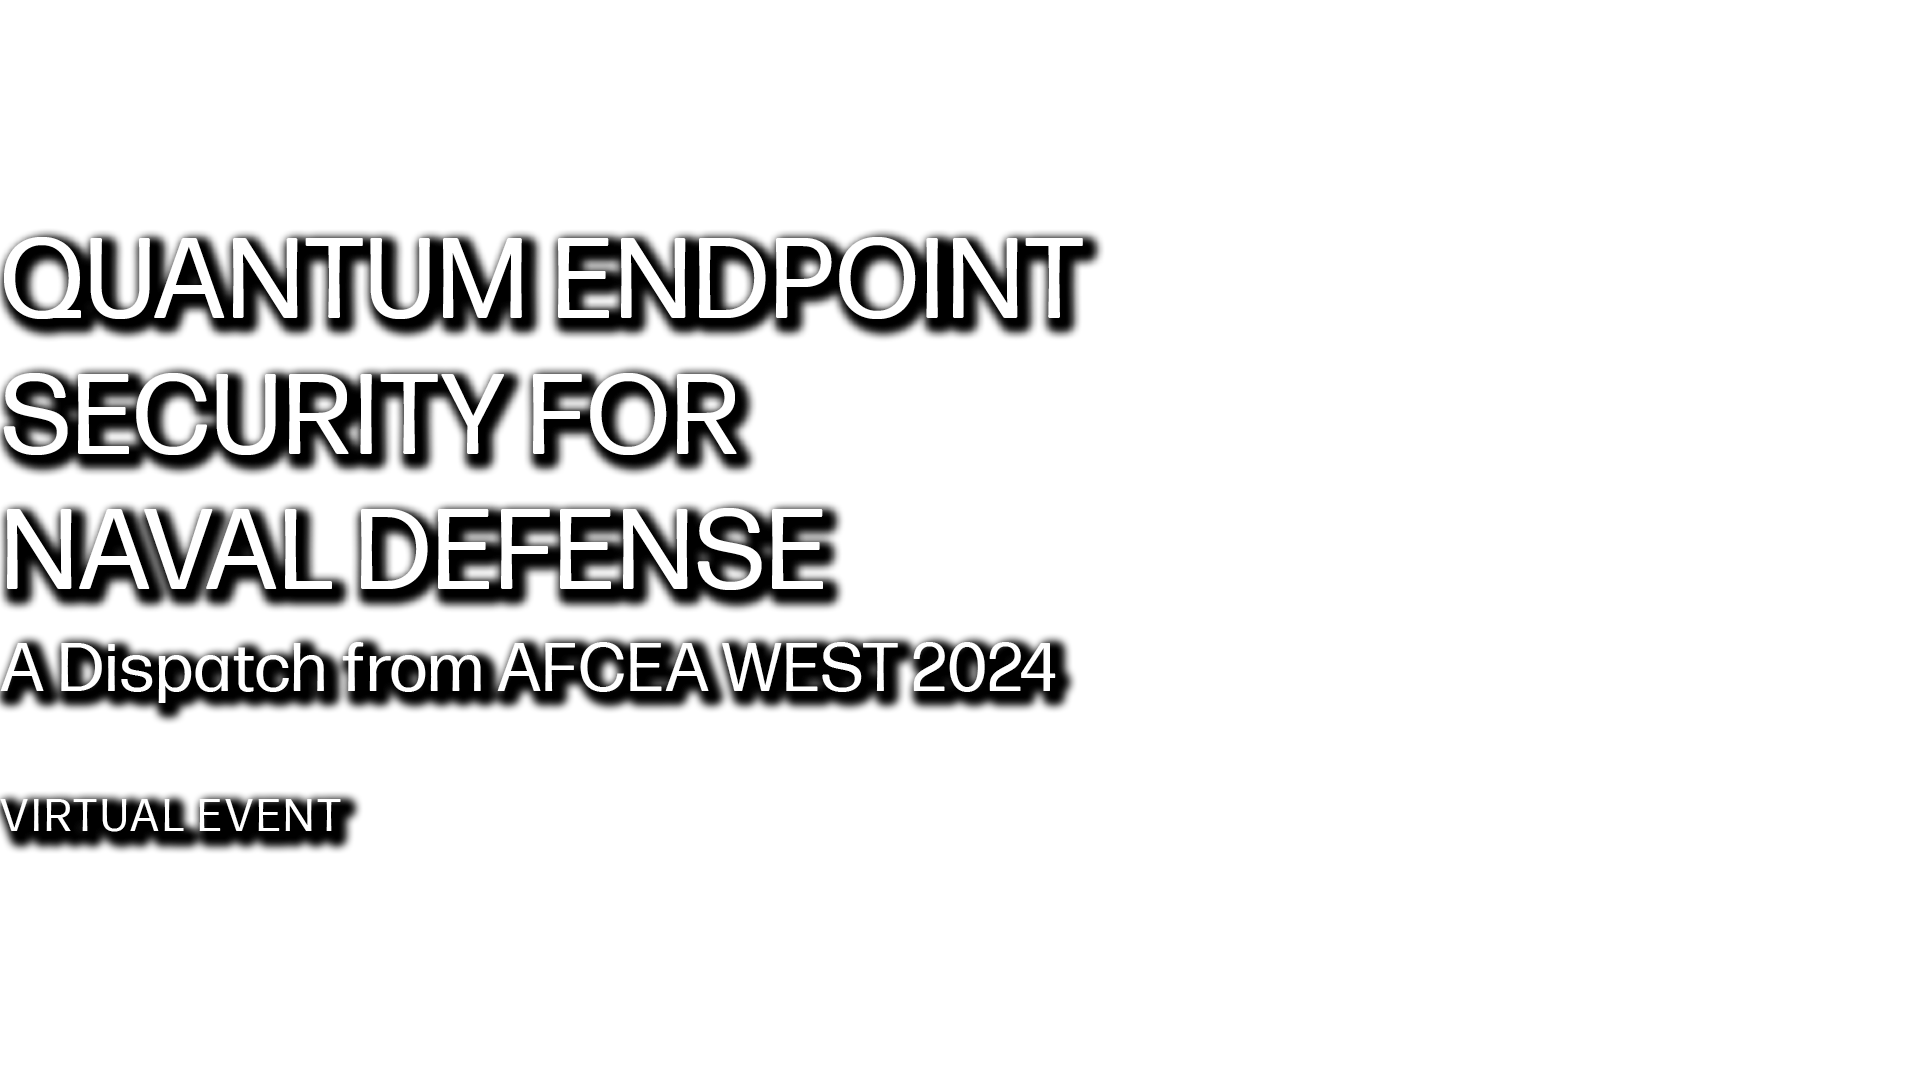 HP Quantum Endpoint Security for Naval Defense A Dispatch from AFCEA